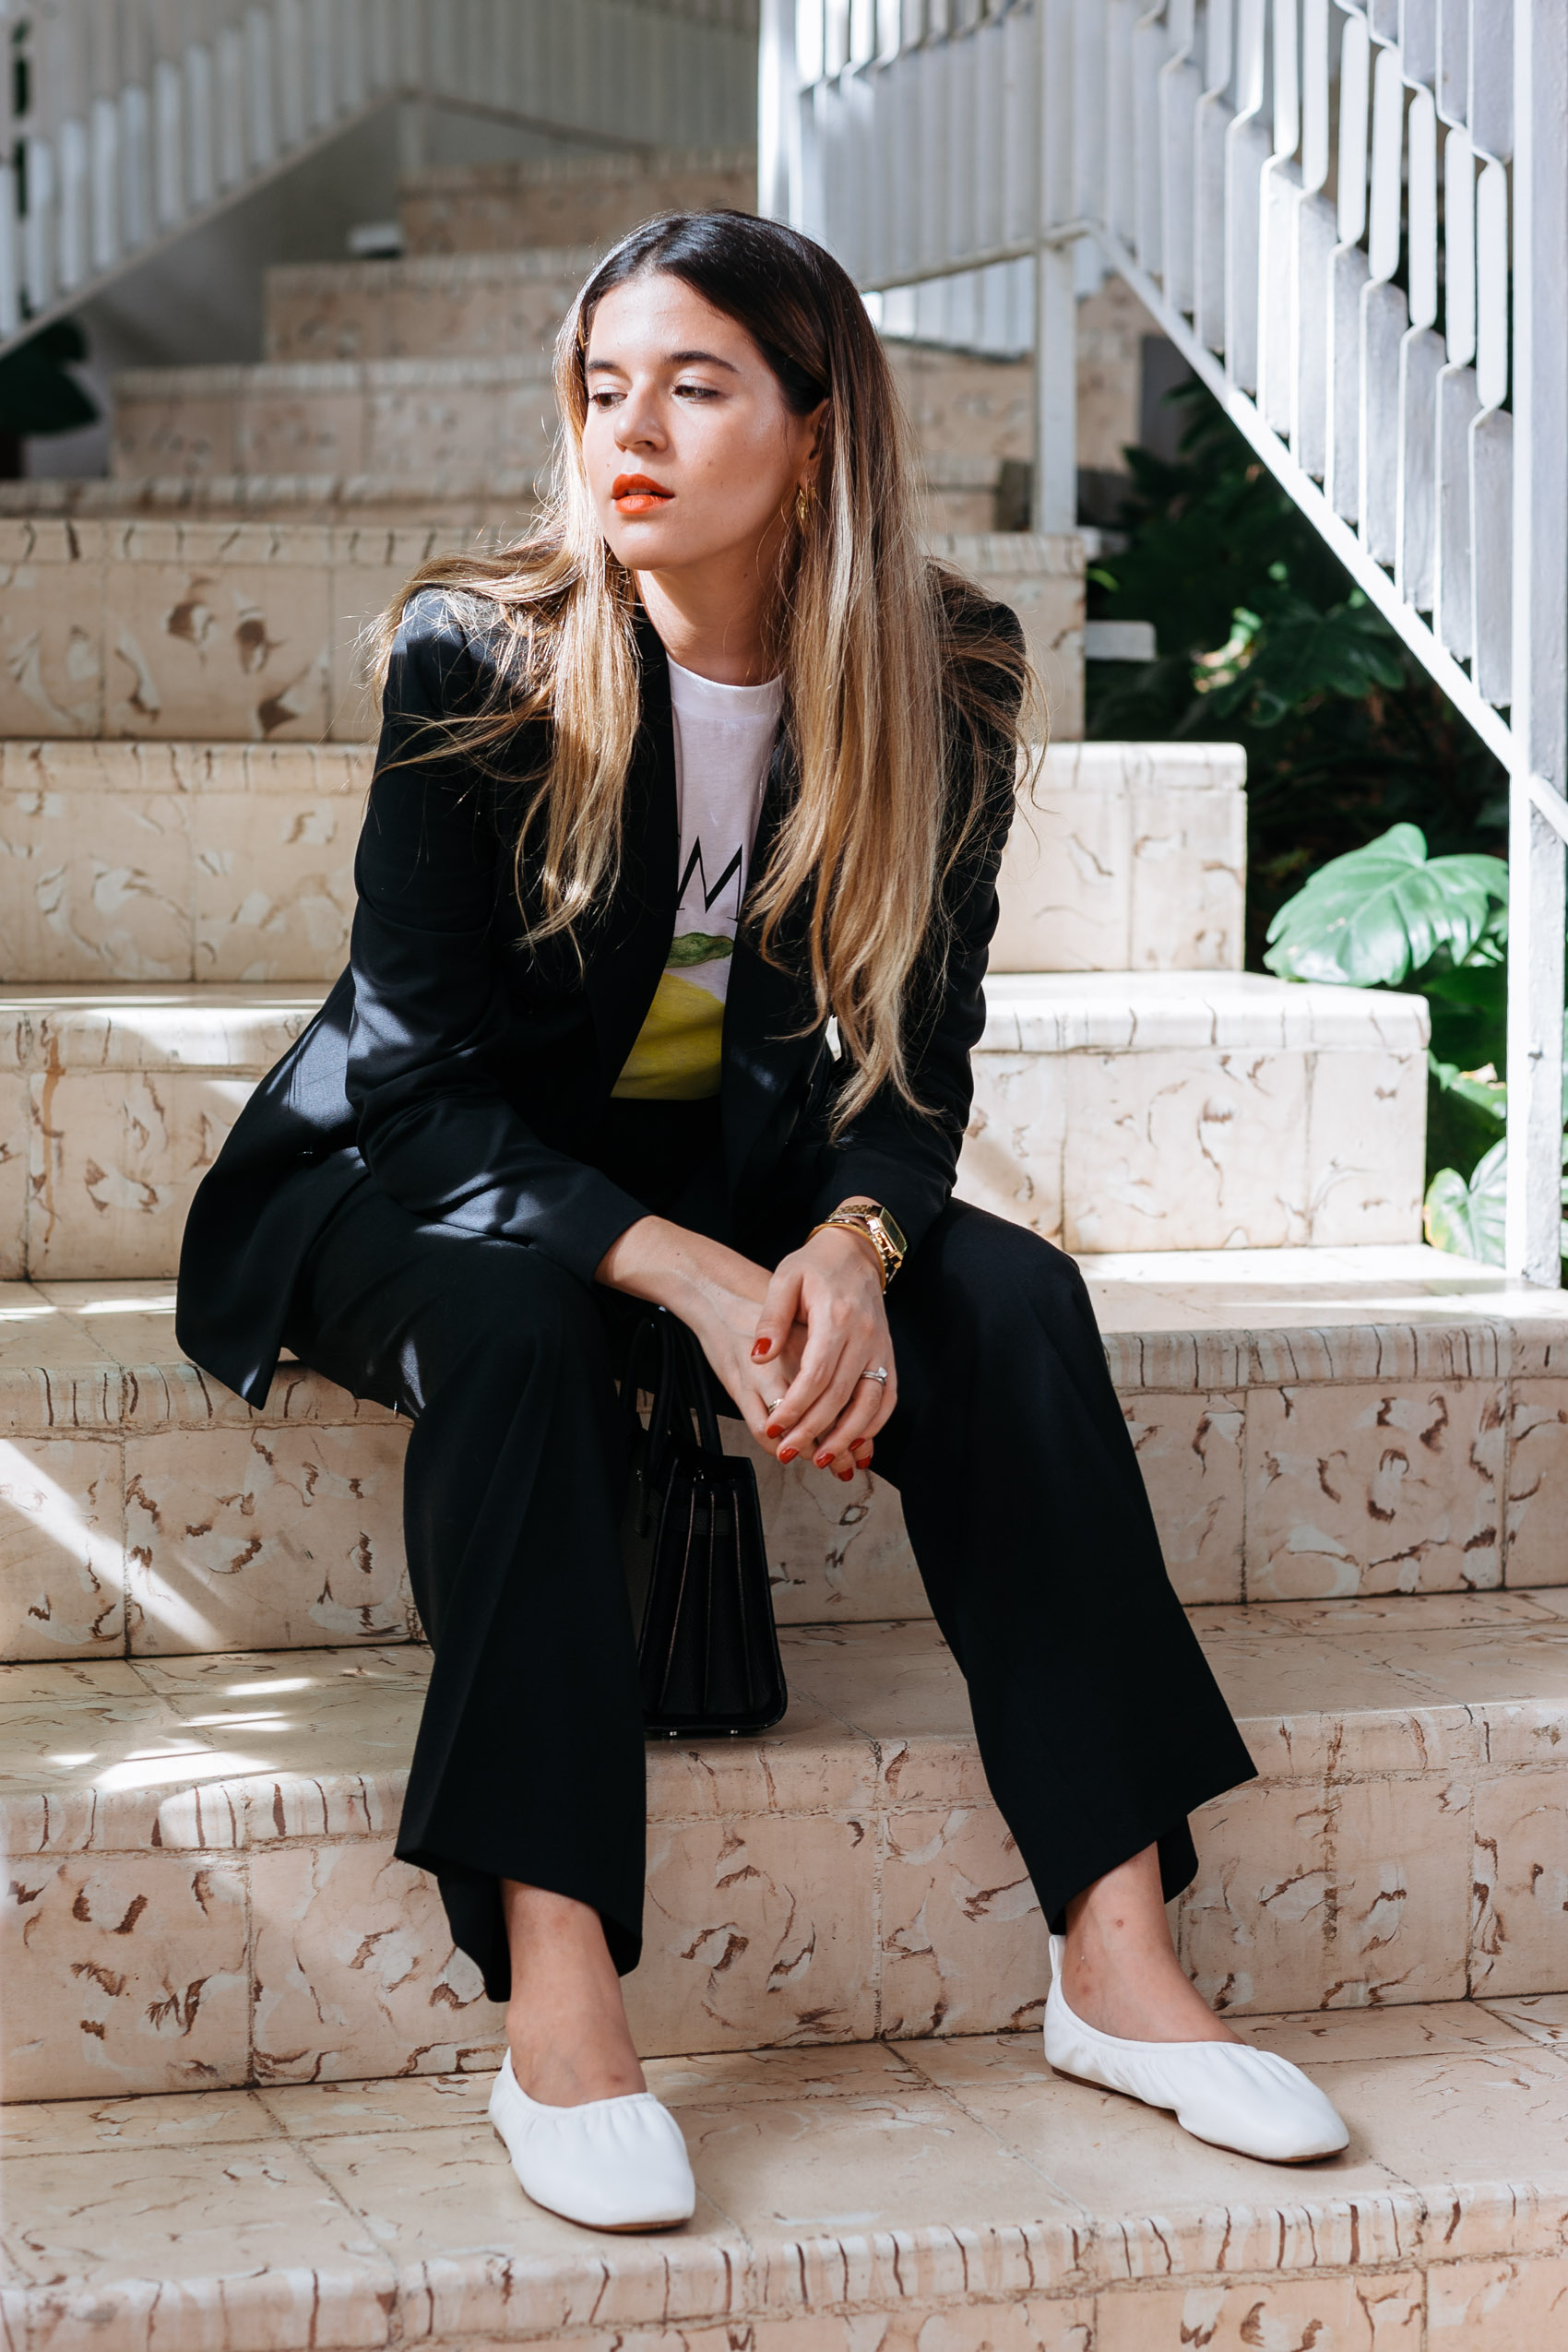 Maristella in a chic and comfortable work outfit idea with a black suit, graphic tee and flat shoes